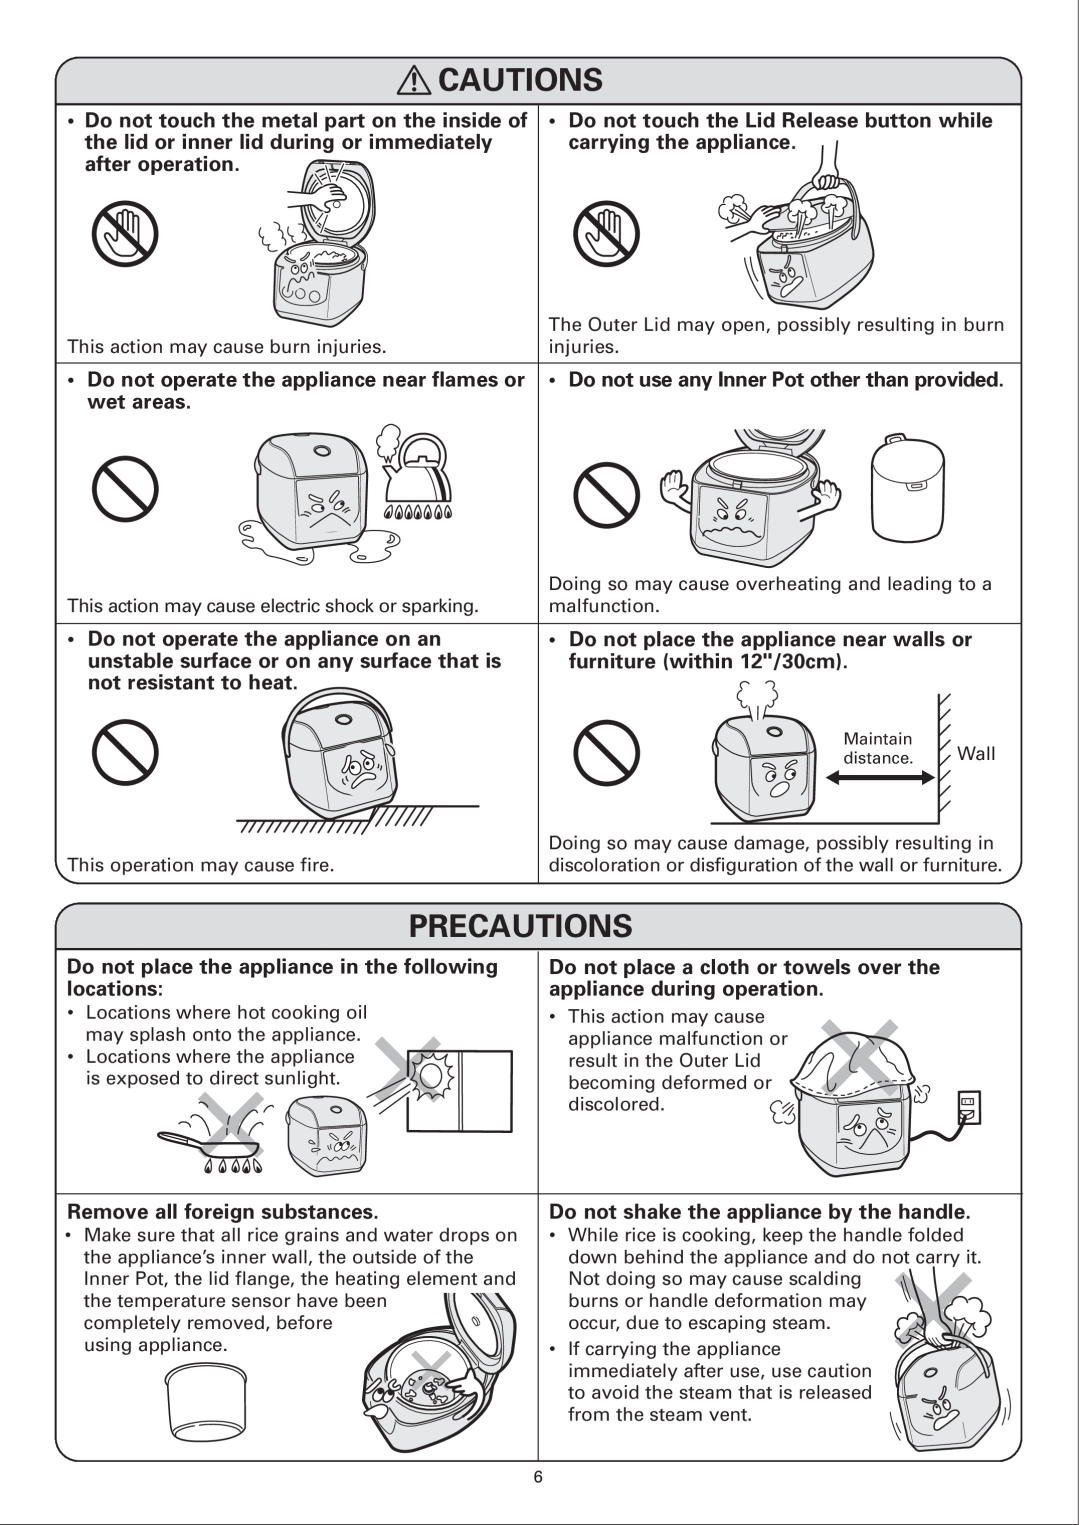 Sanyo ECJ-E35S Cautions, Precautions, Do not touch the metal part on the inside of, carrying the appliance, wet areas 